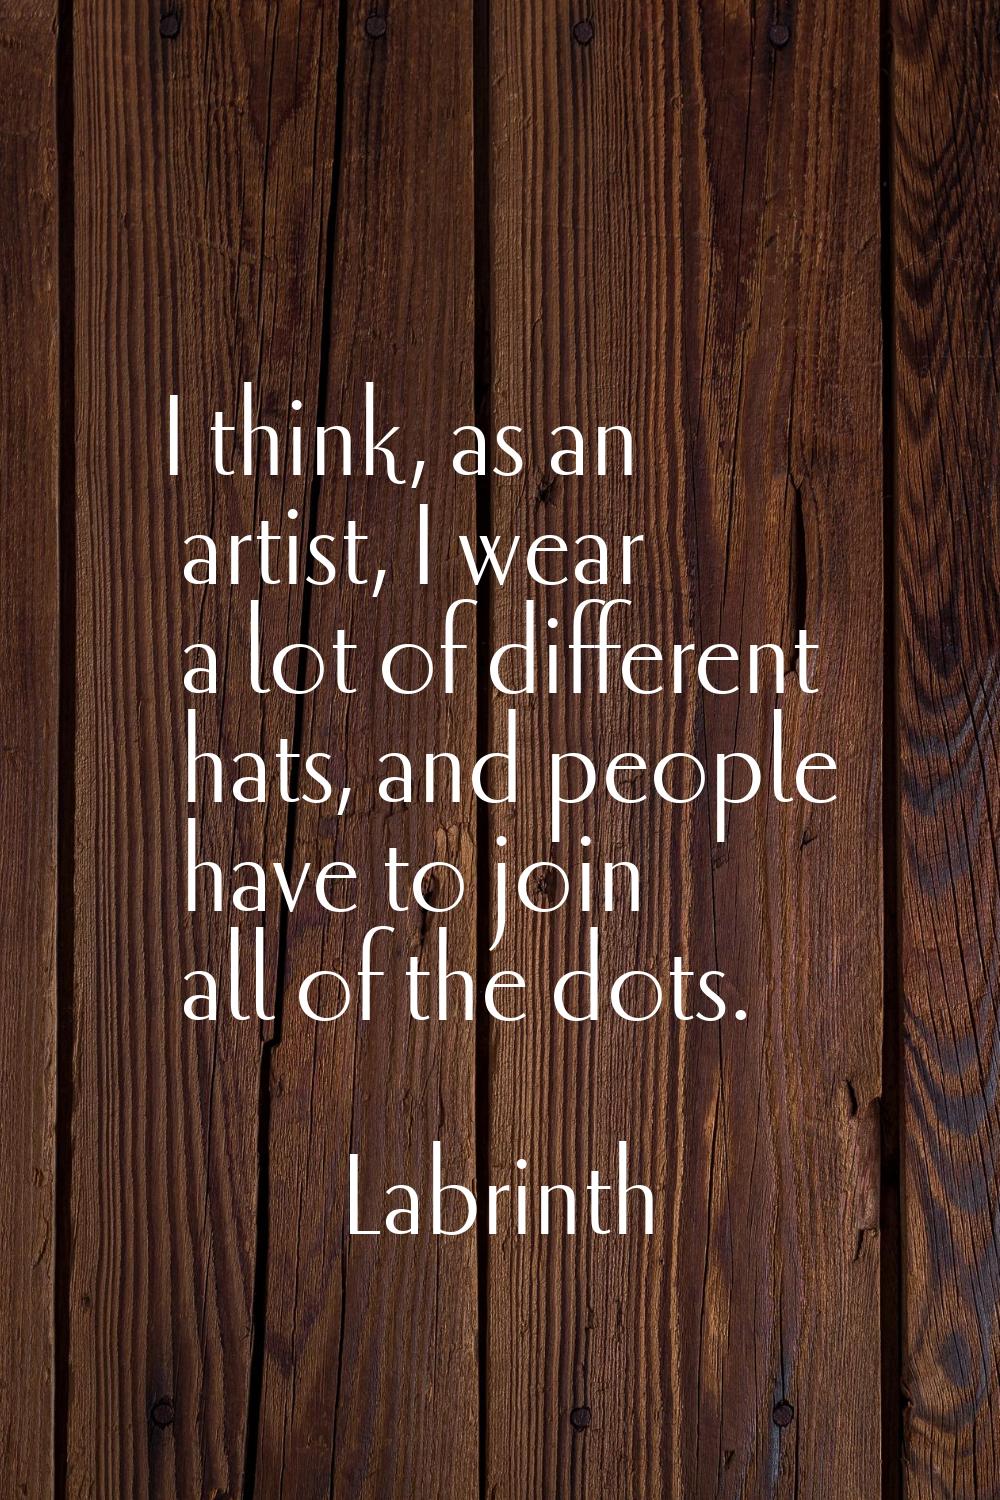 I think, as an artist, I wear a lot of different hats, and people have to join all of the dots.